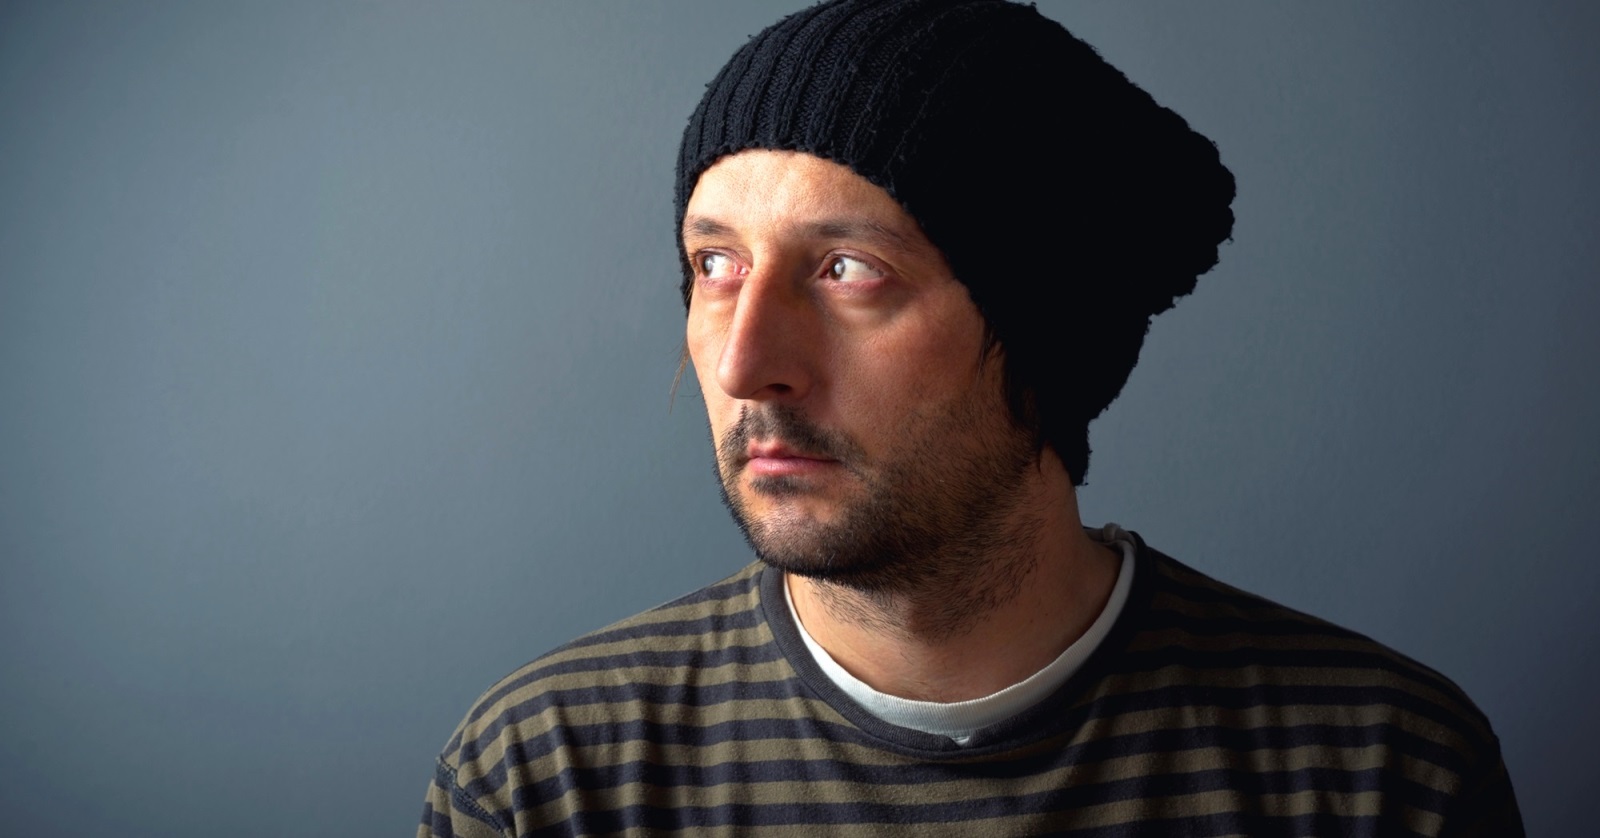 A man wearing a black knit beanie and a striped shirt looks off to the side against a gray background. He has a slight beard and appears thoughtful or contemplative.